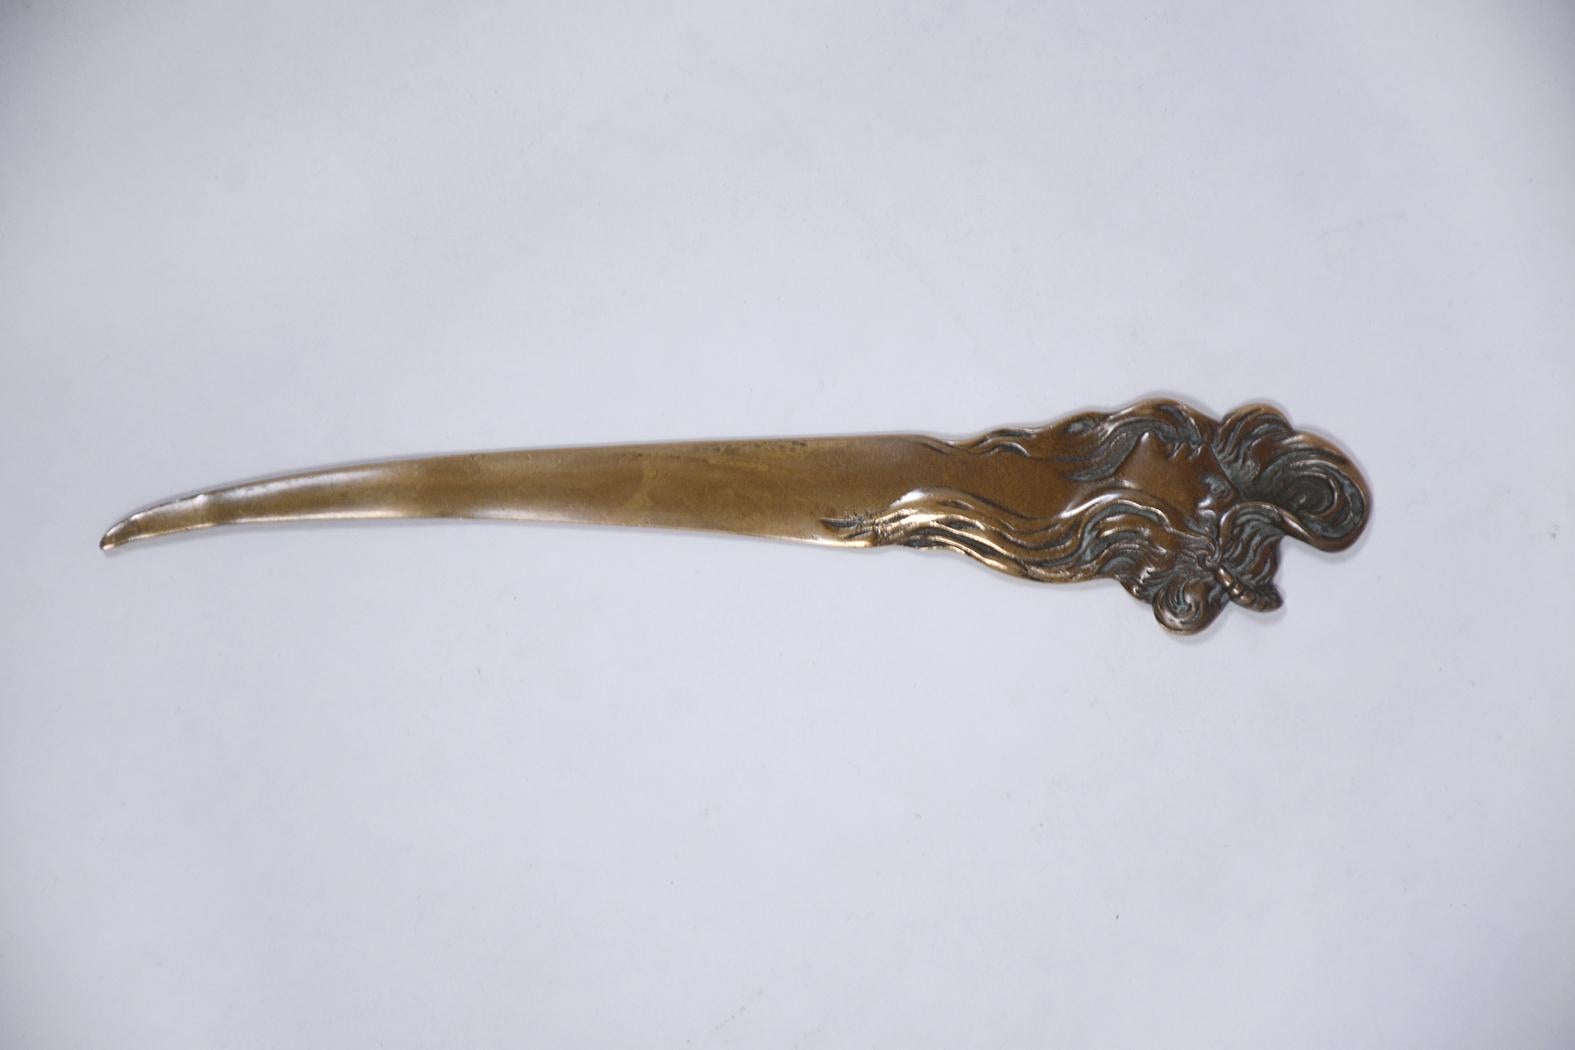 An antique French Art Nouveau letter opener handcrafted out of brass. This intricate piece features a crafted woman a beautiful original patina finish.